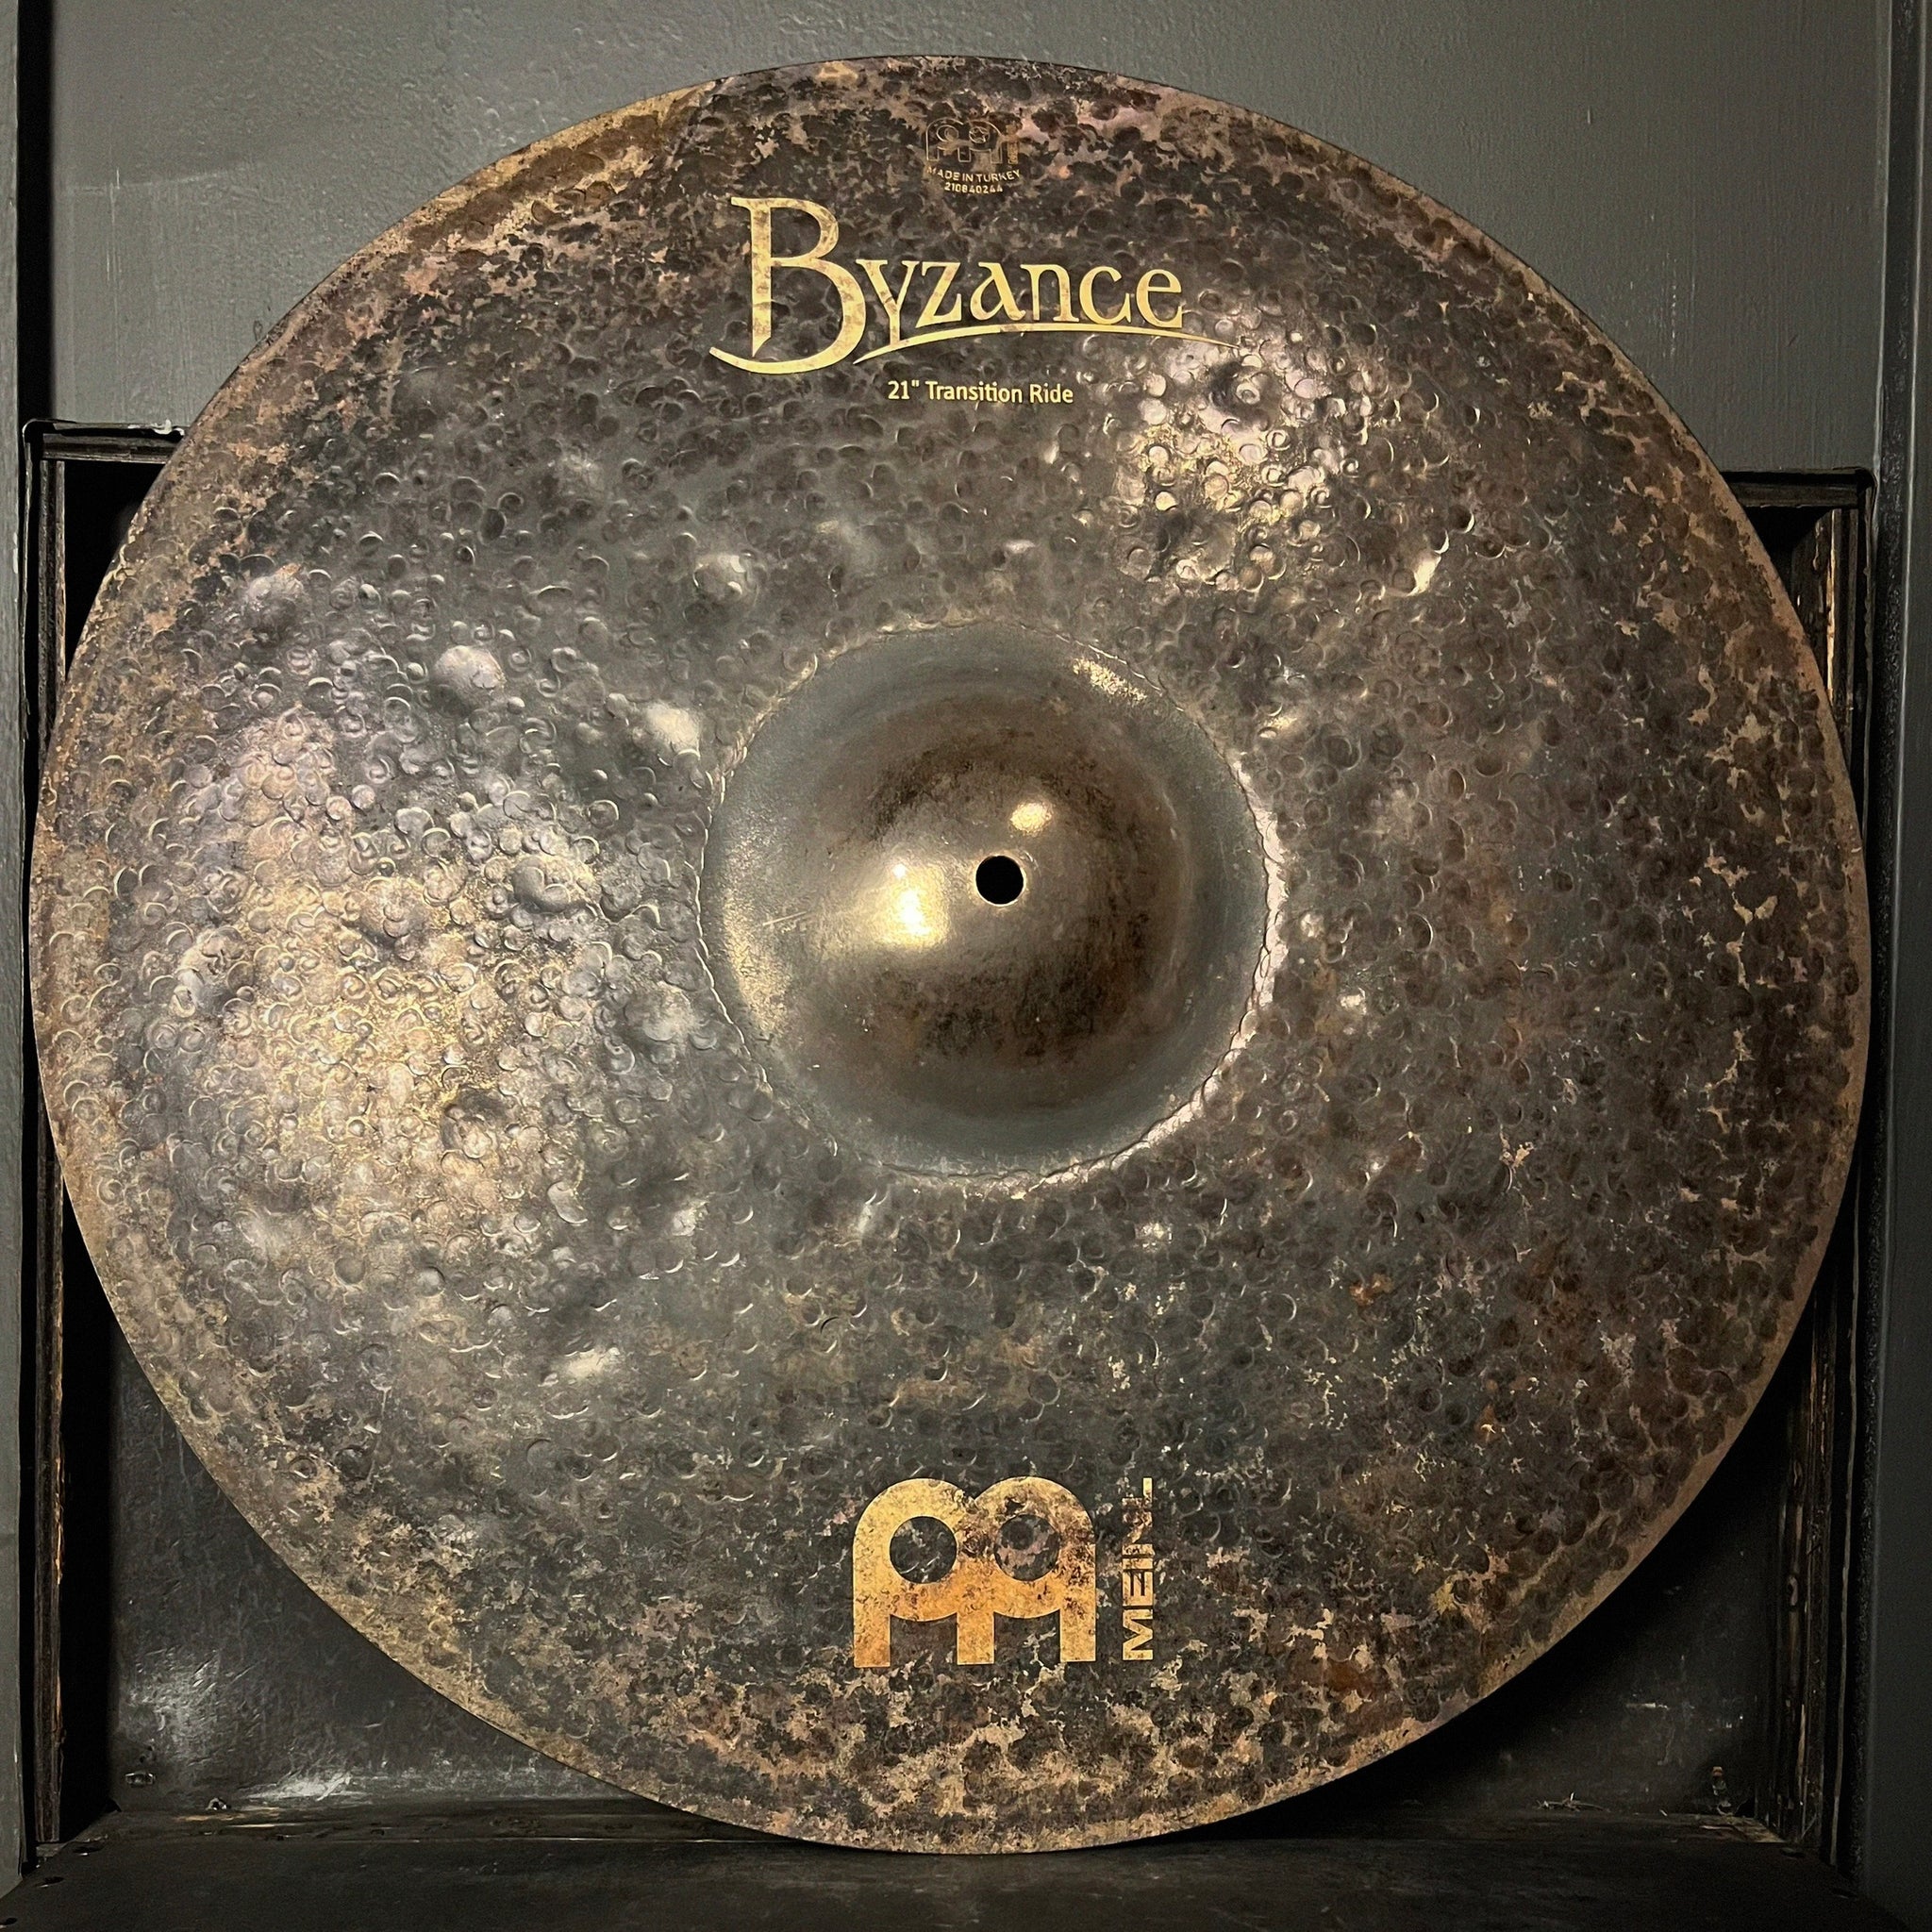 NEW Meinl 21" Byzance Extra Dry Transition Ride Cymbal - 2385g